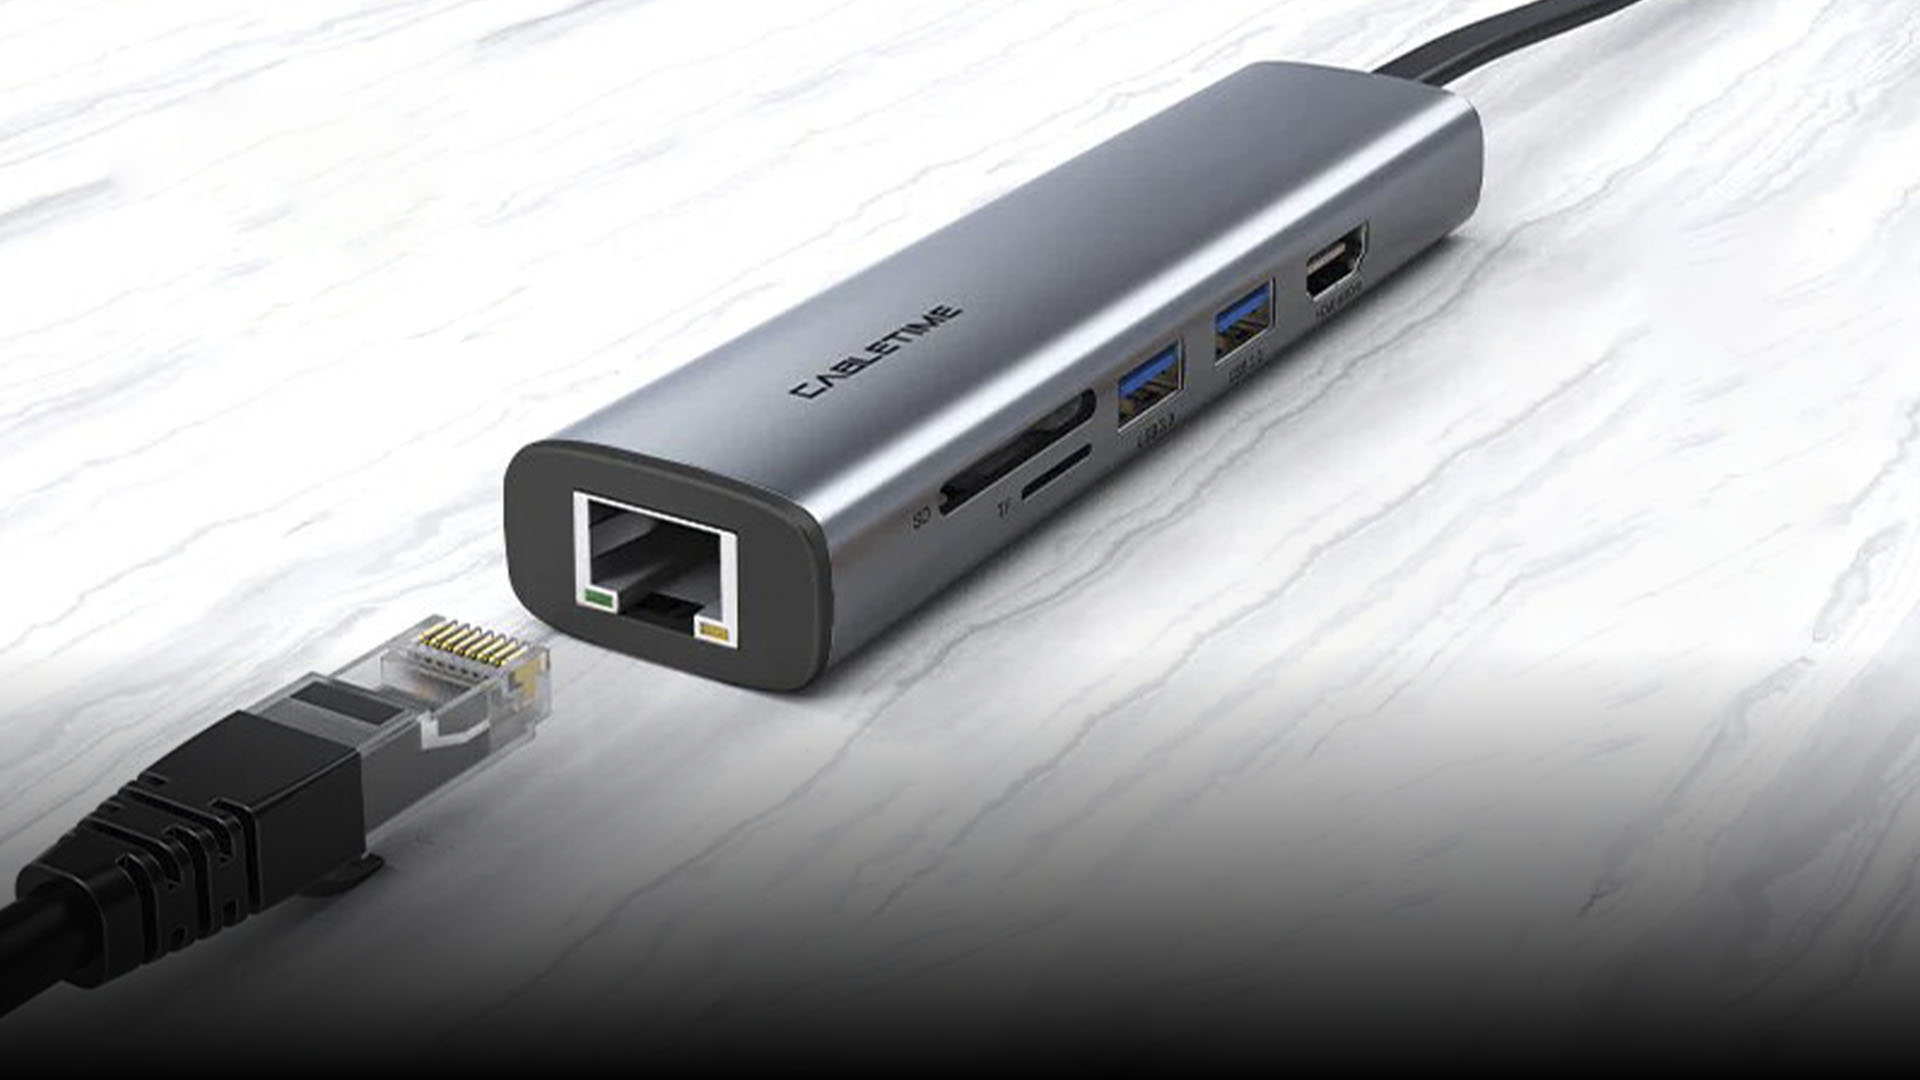 Cabletime Slim 7-in-1 USB C Hub - Análisis (Review)